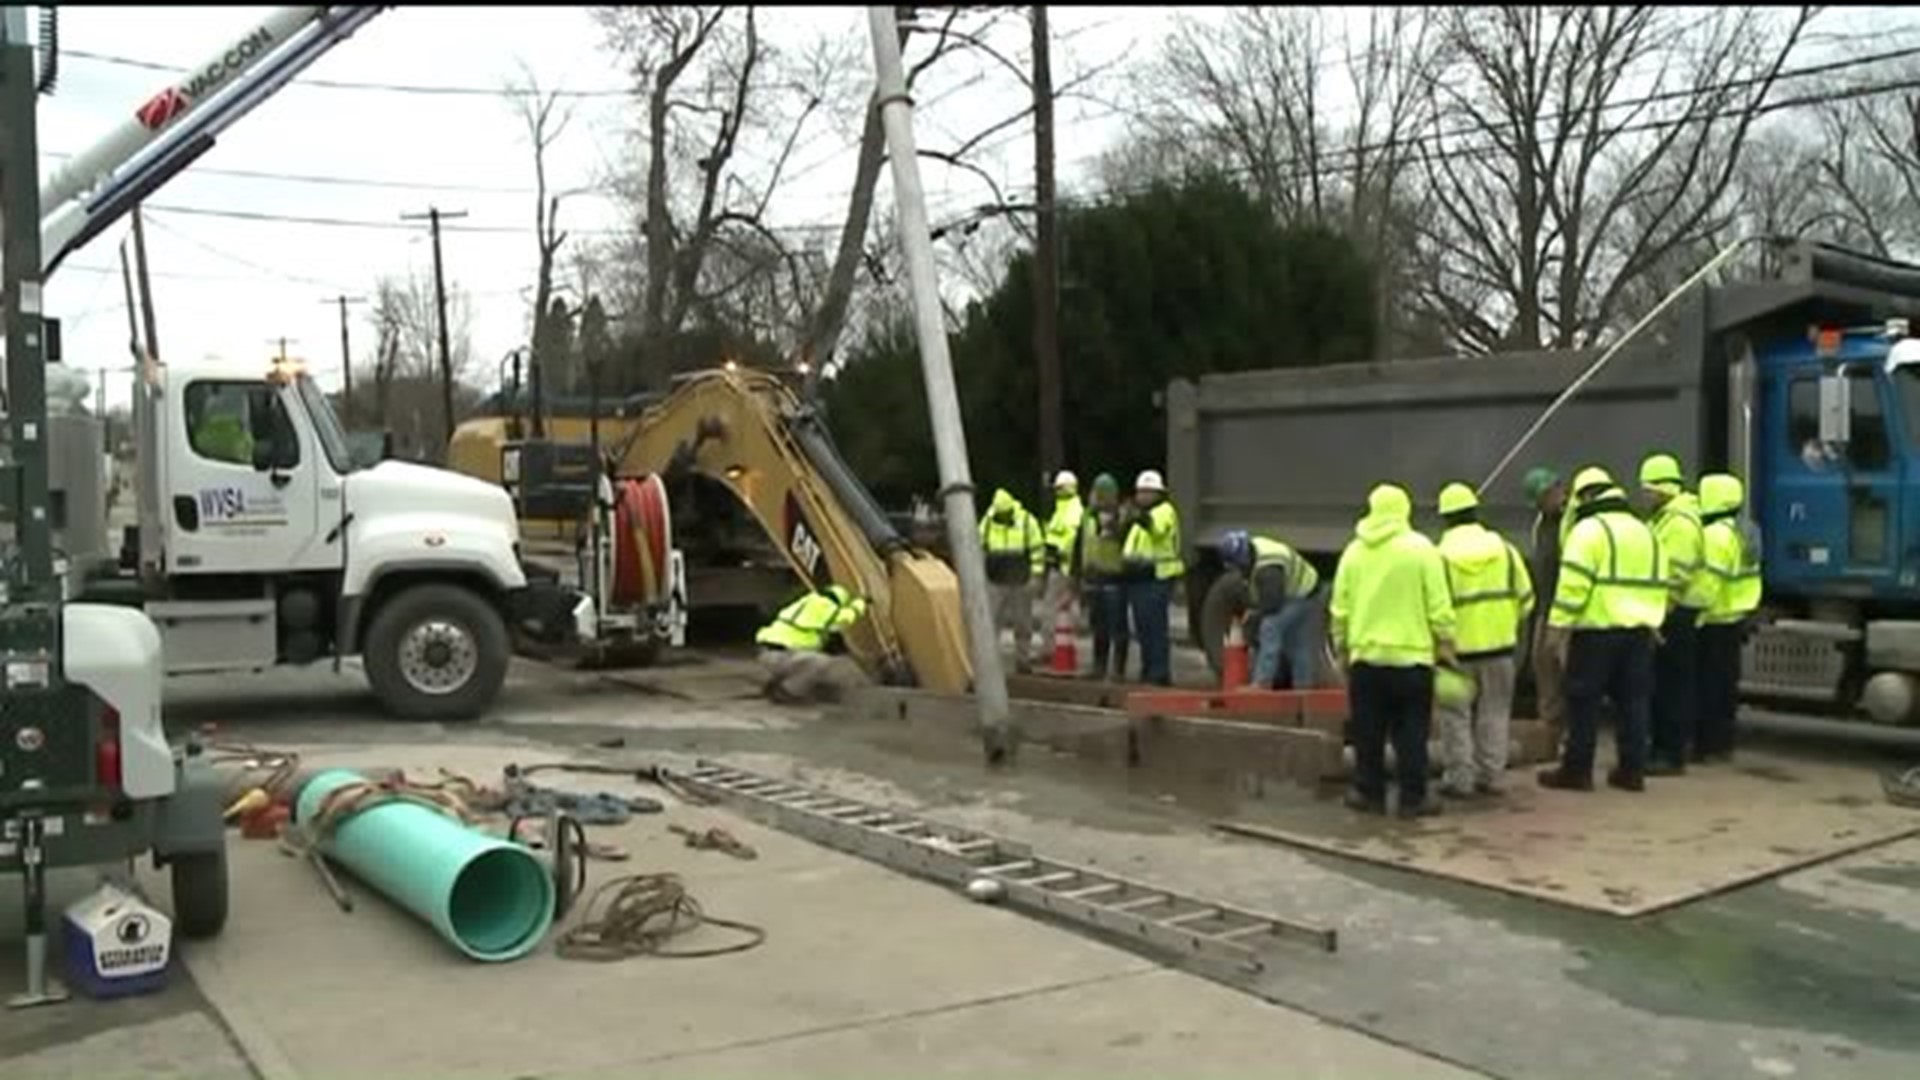 Repairs to Wilkes-Barre Sewer Line to Continue